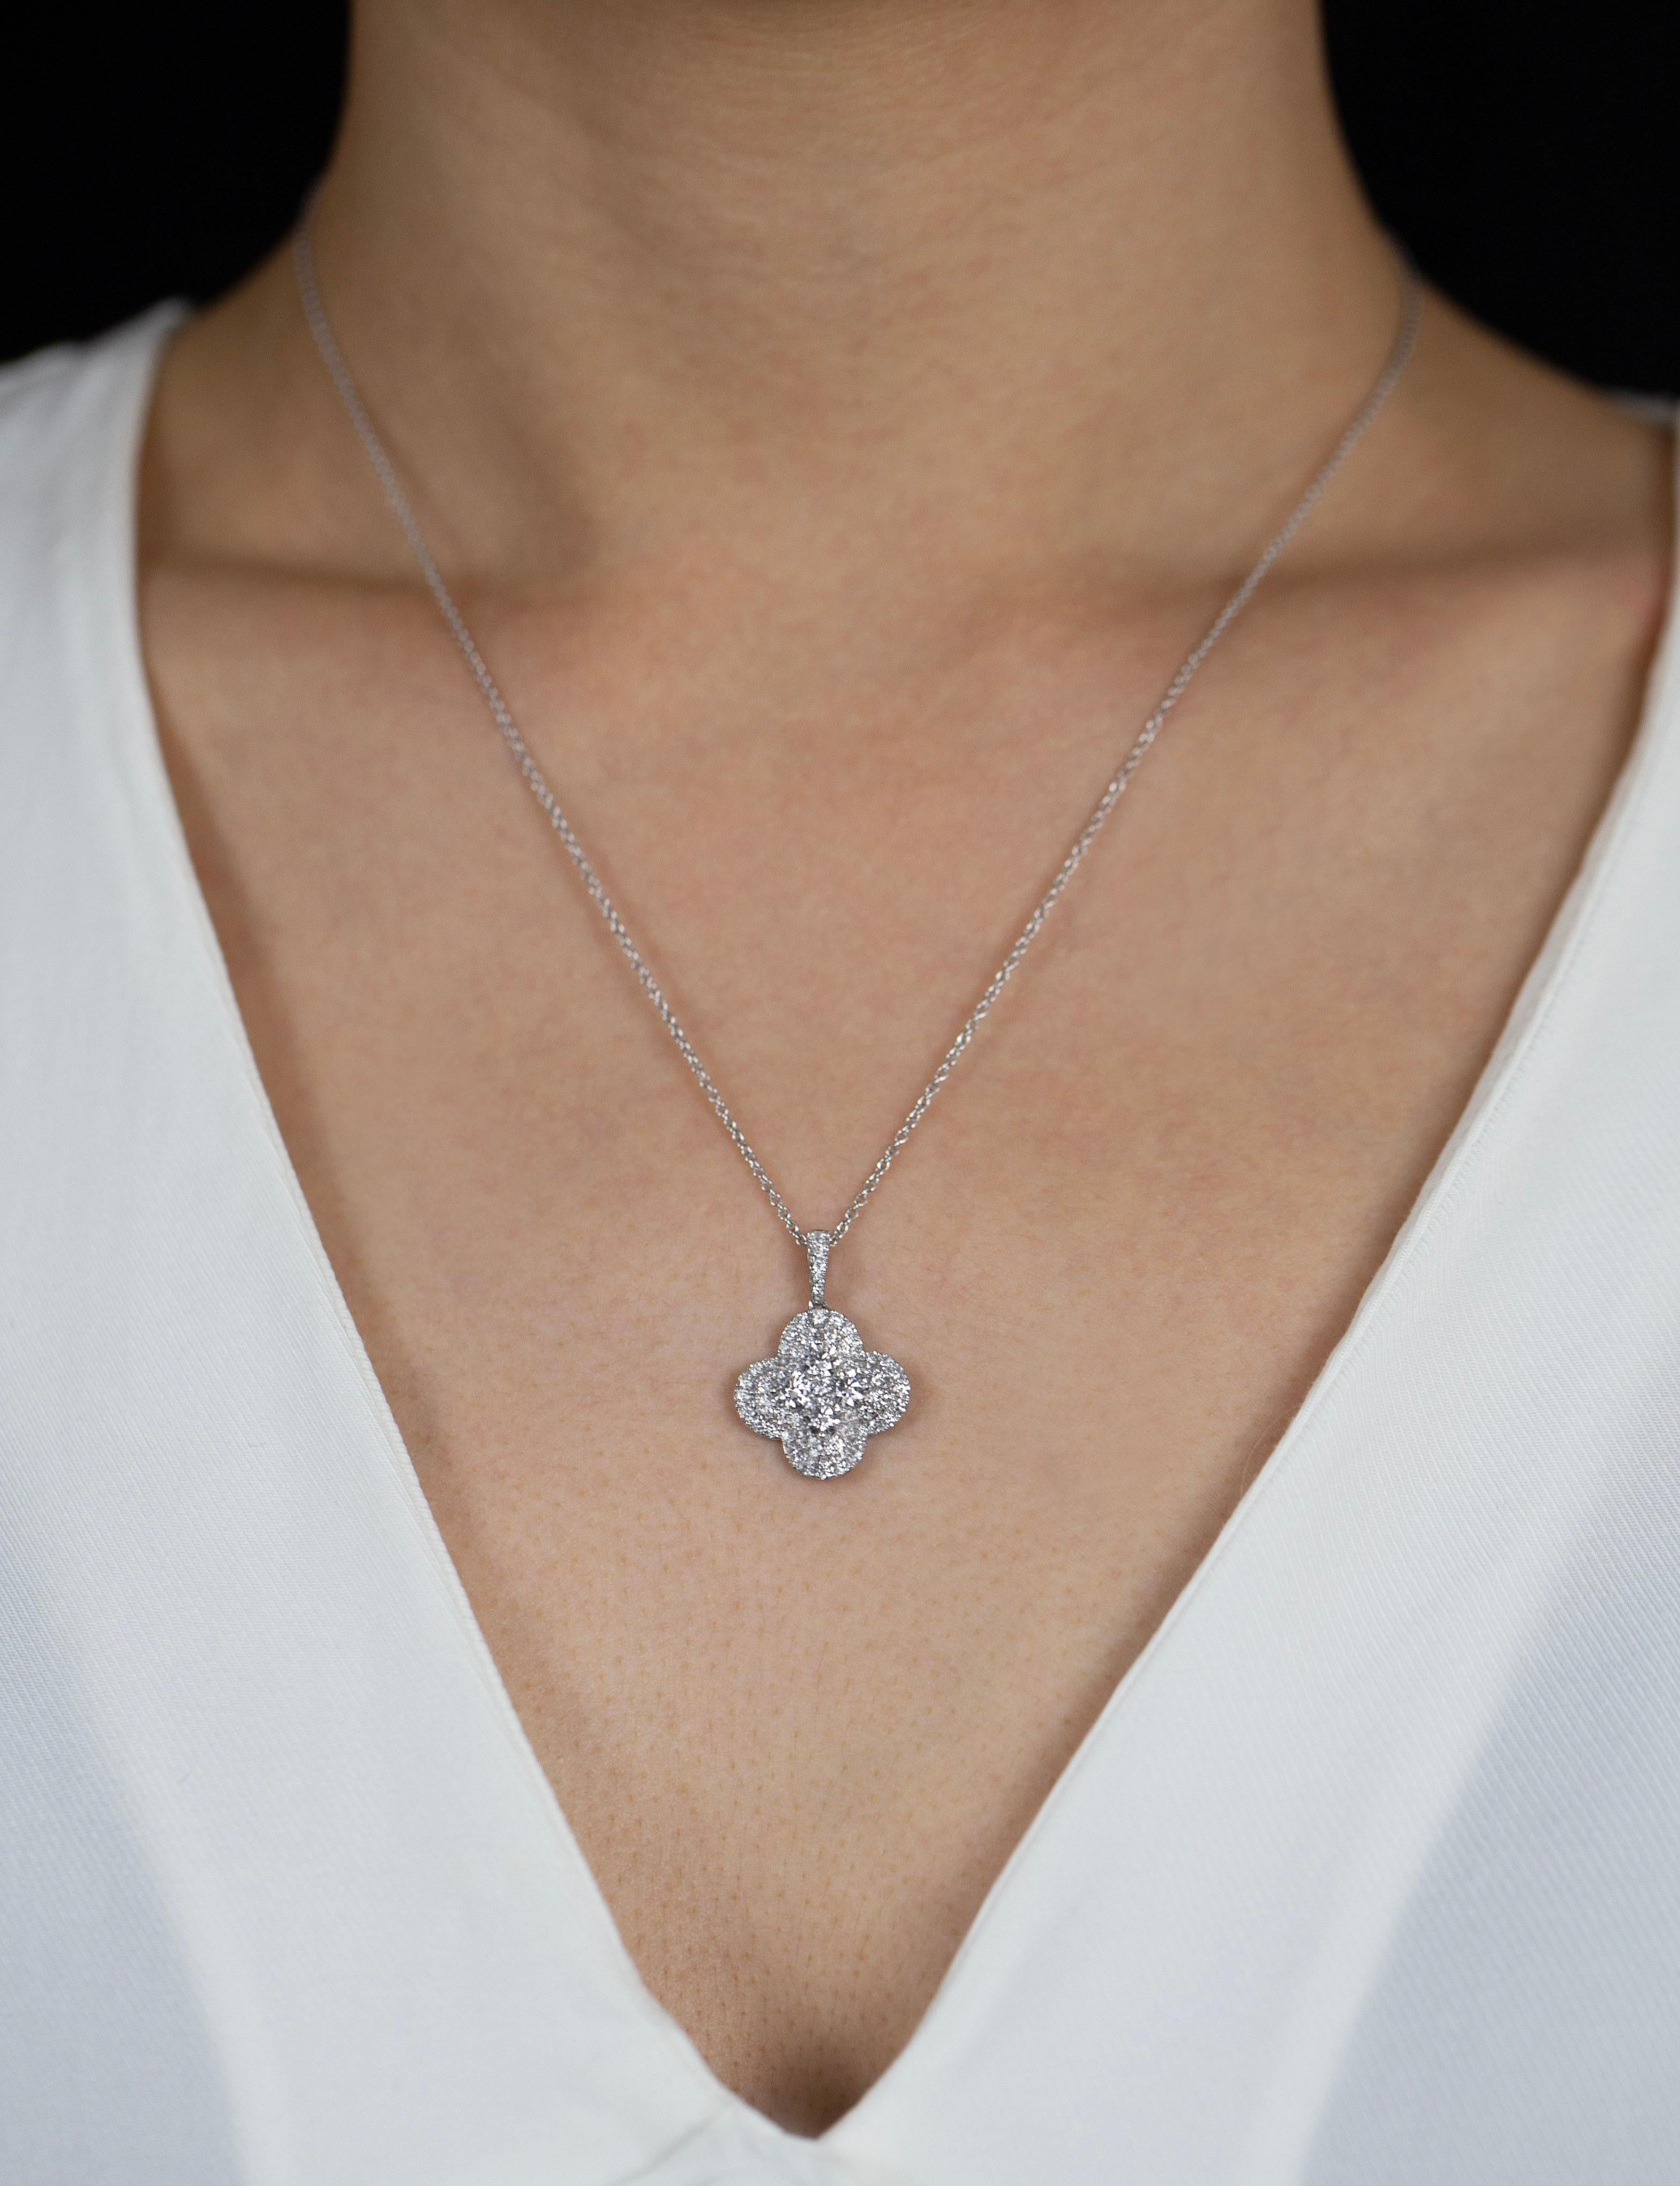 Roman Malakov 1.57 Carats Total Round Cut Diamond Clover Shape Pendant Necklace In New Condition For Sale In New York, NY